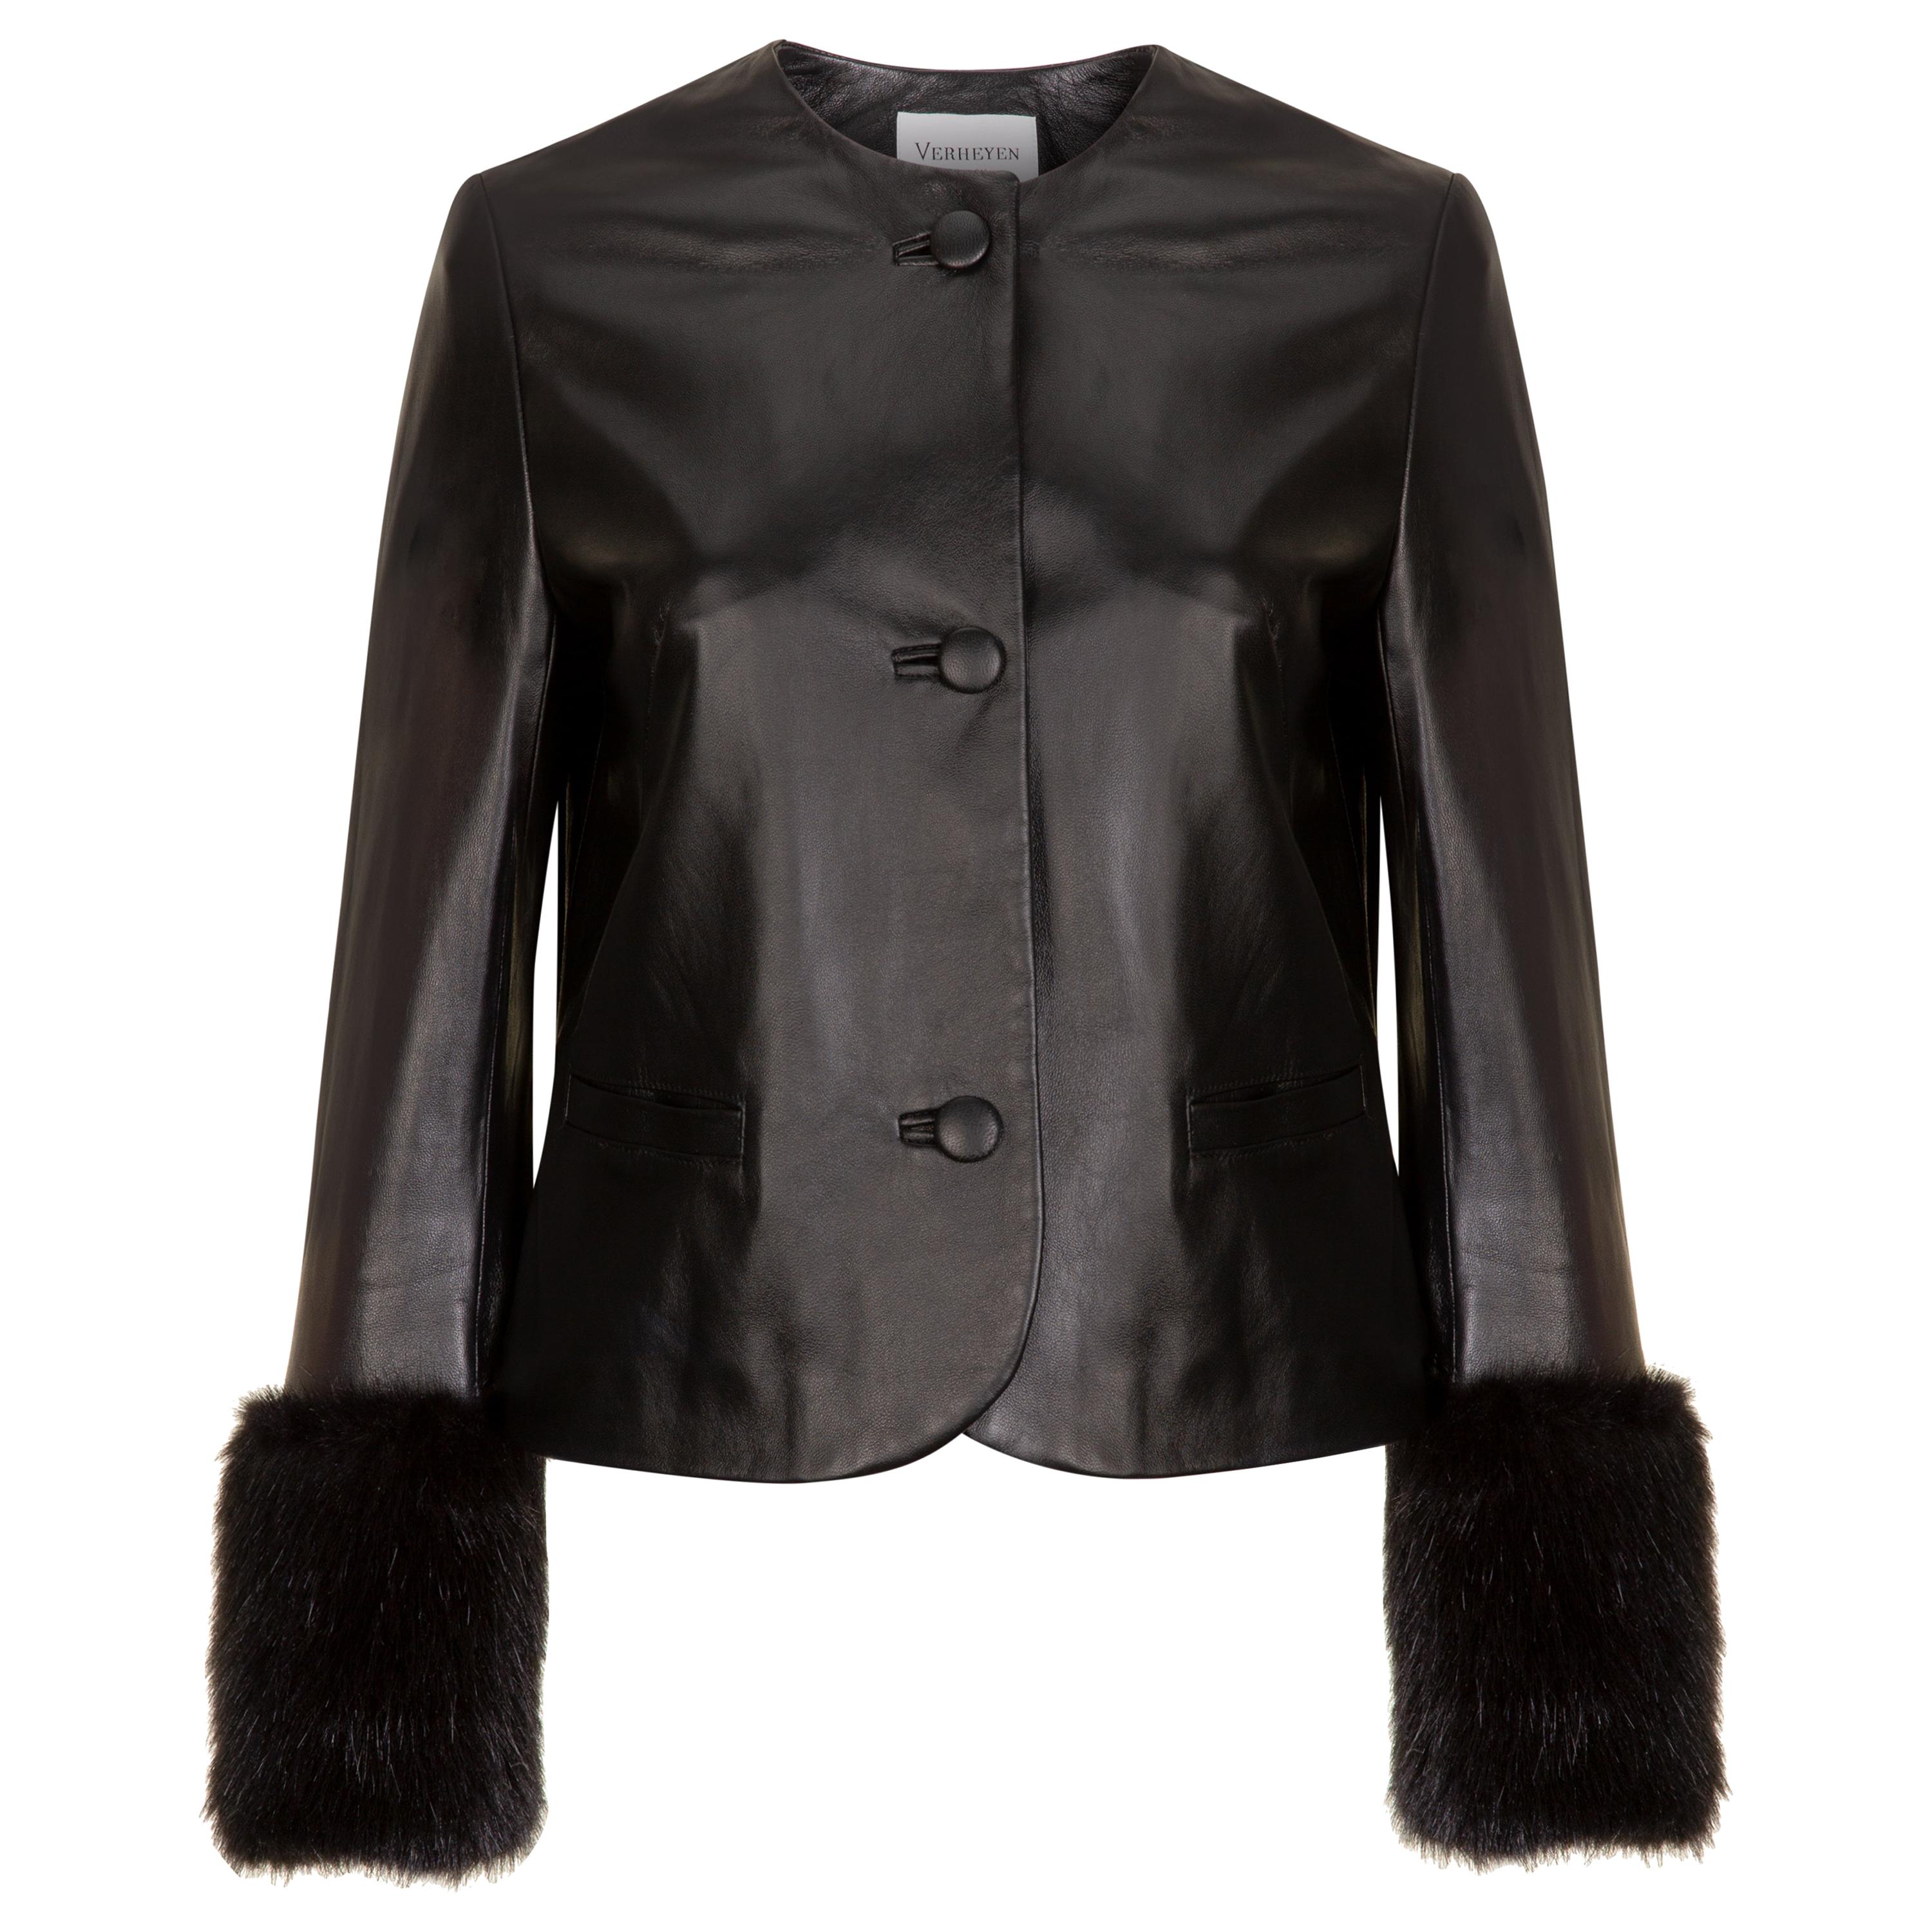 Verheyen Vita Cropped Jacket in Black Leather with Faux Fur - Size uk 10 For Sale